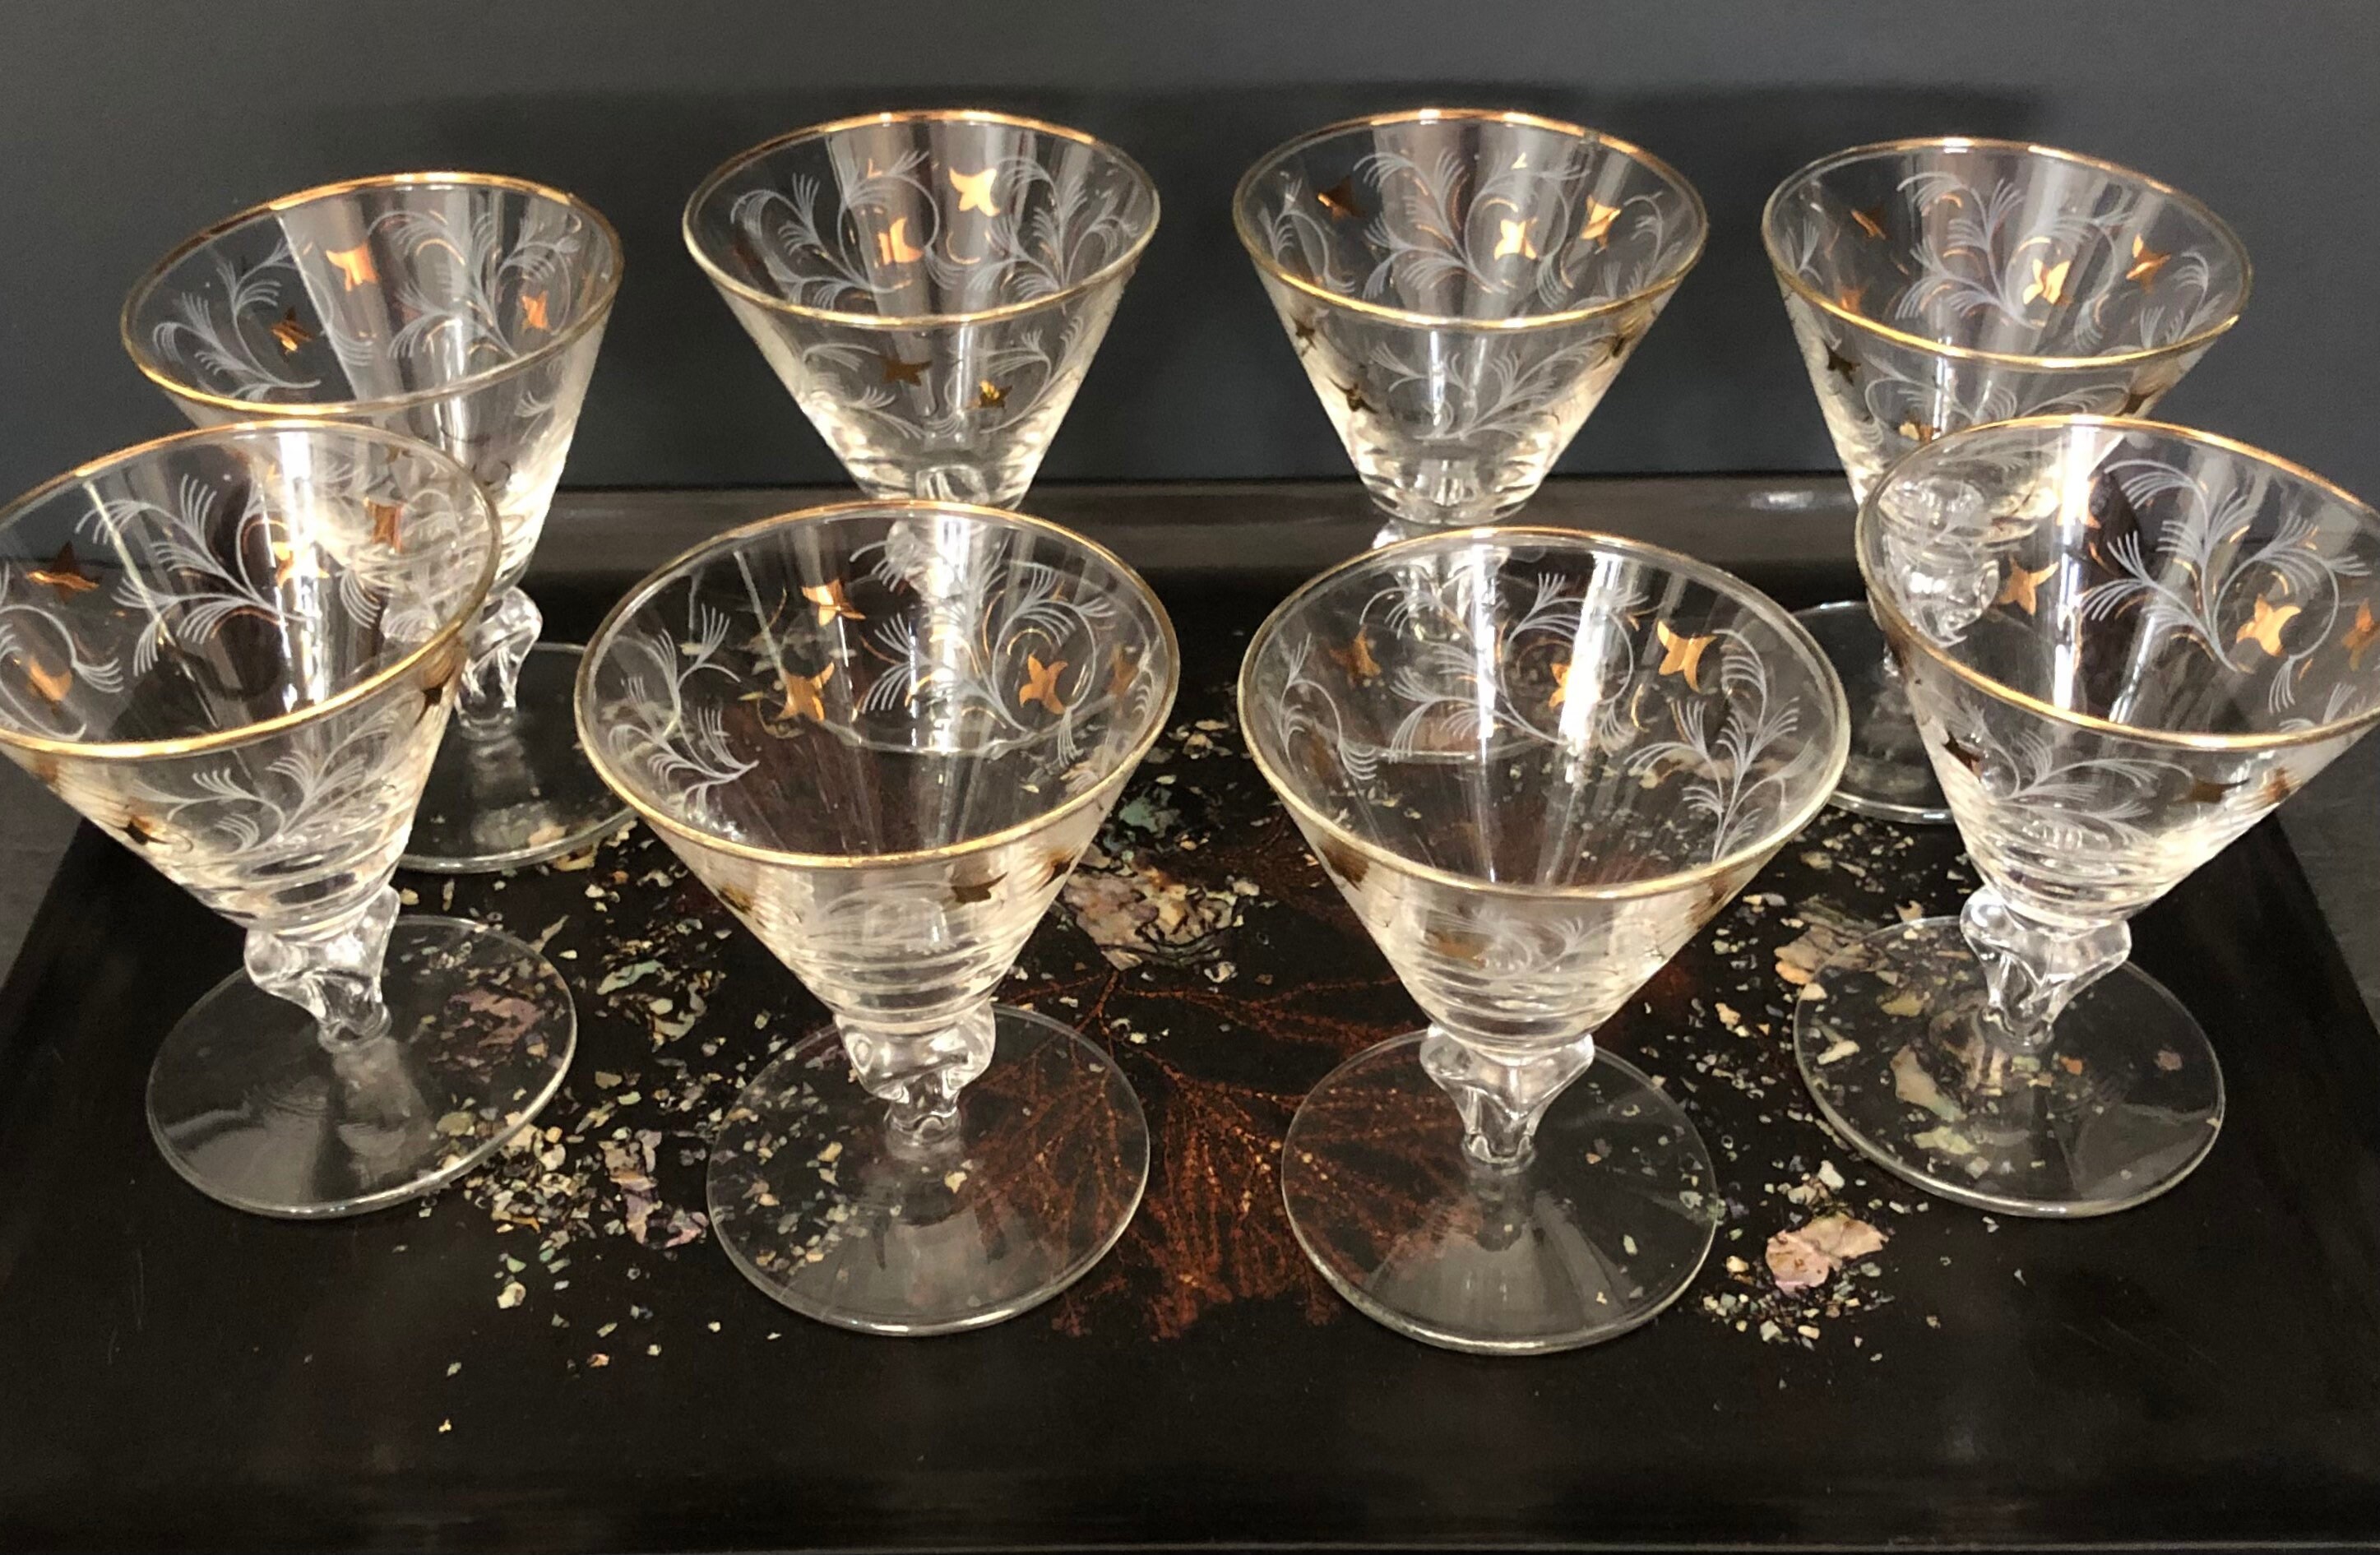 Set of Eight Vintage Cocktail Glasses by Libbey in Original Box - E-mosaik